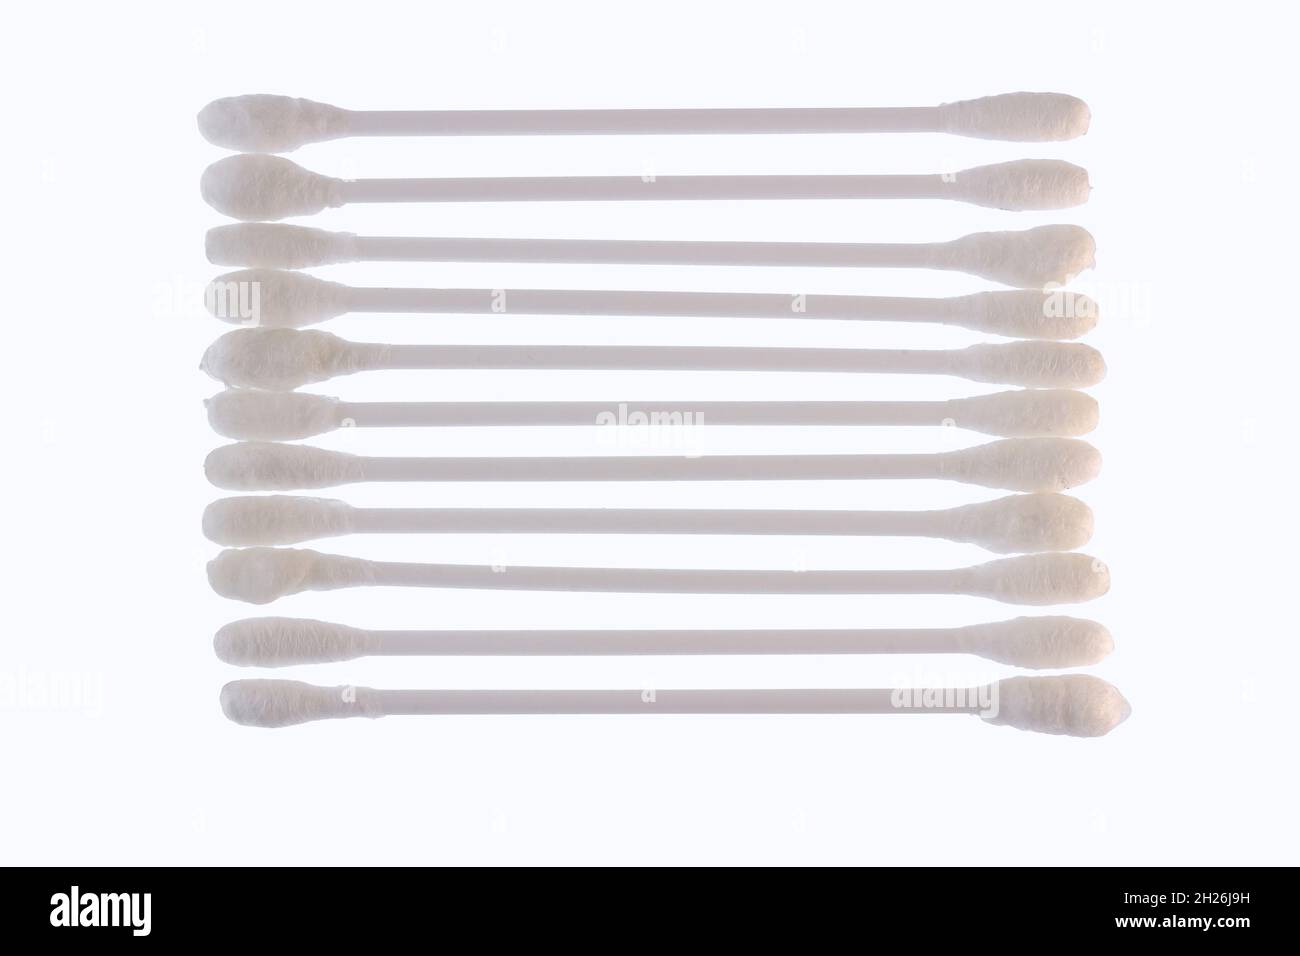 Several white cotton buds with plastic material lined up and isolated on a white background, the concept of health, beauty, and hygiene Stock Photo